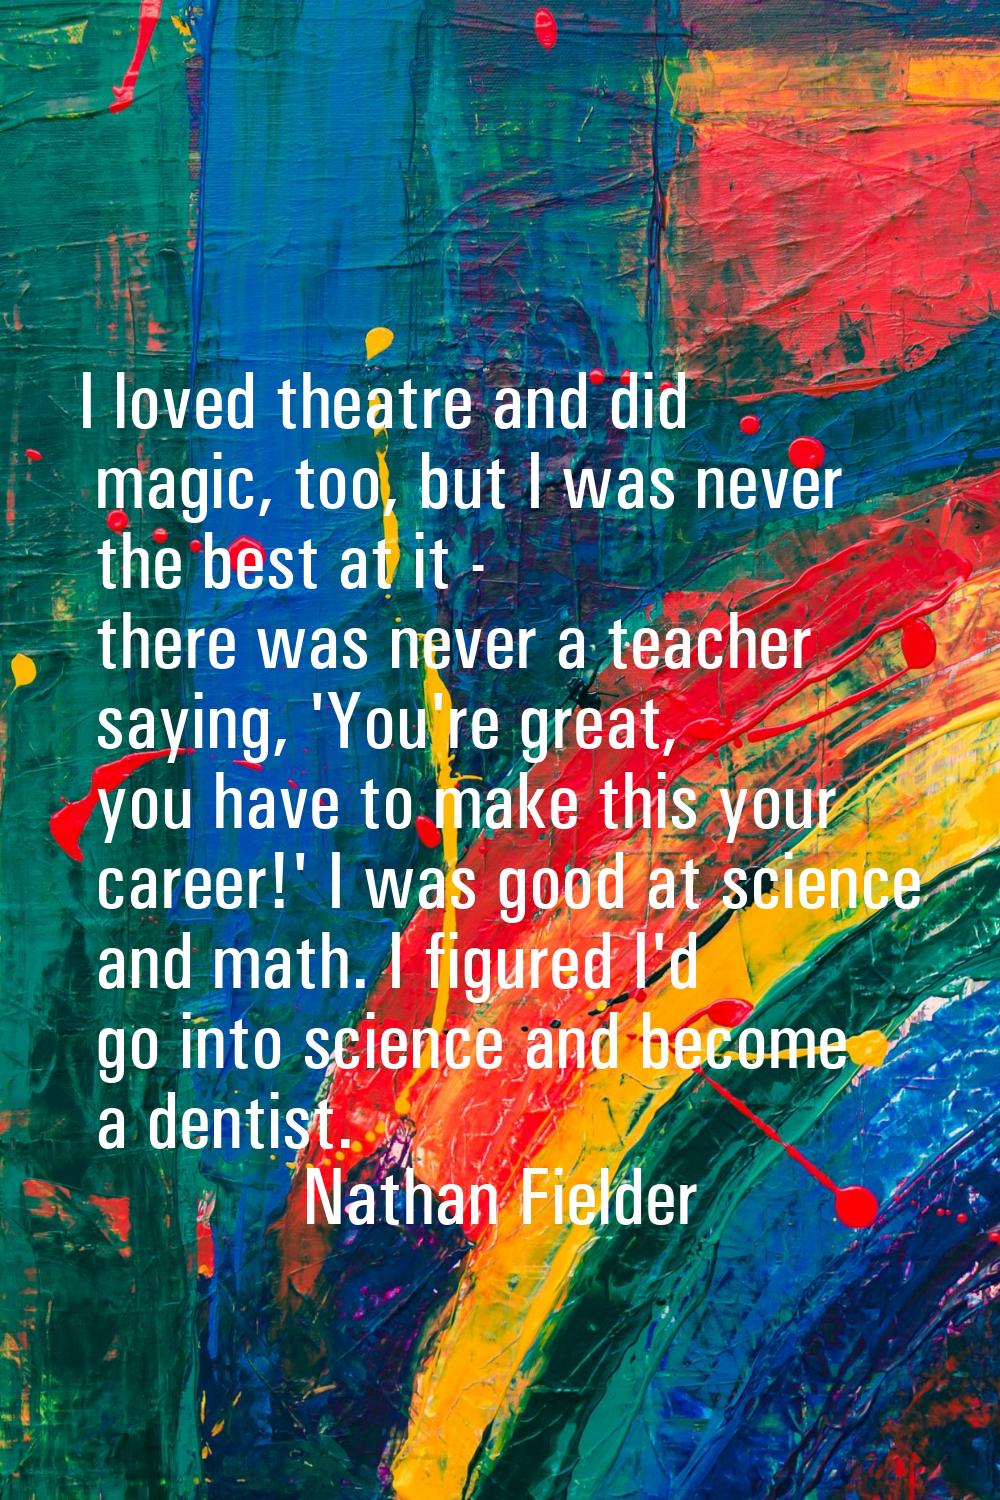 I loved theatre and did magic, too, but I was never the best at it - there was never a teacher sayi